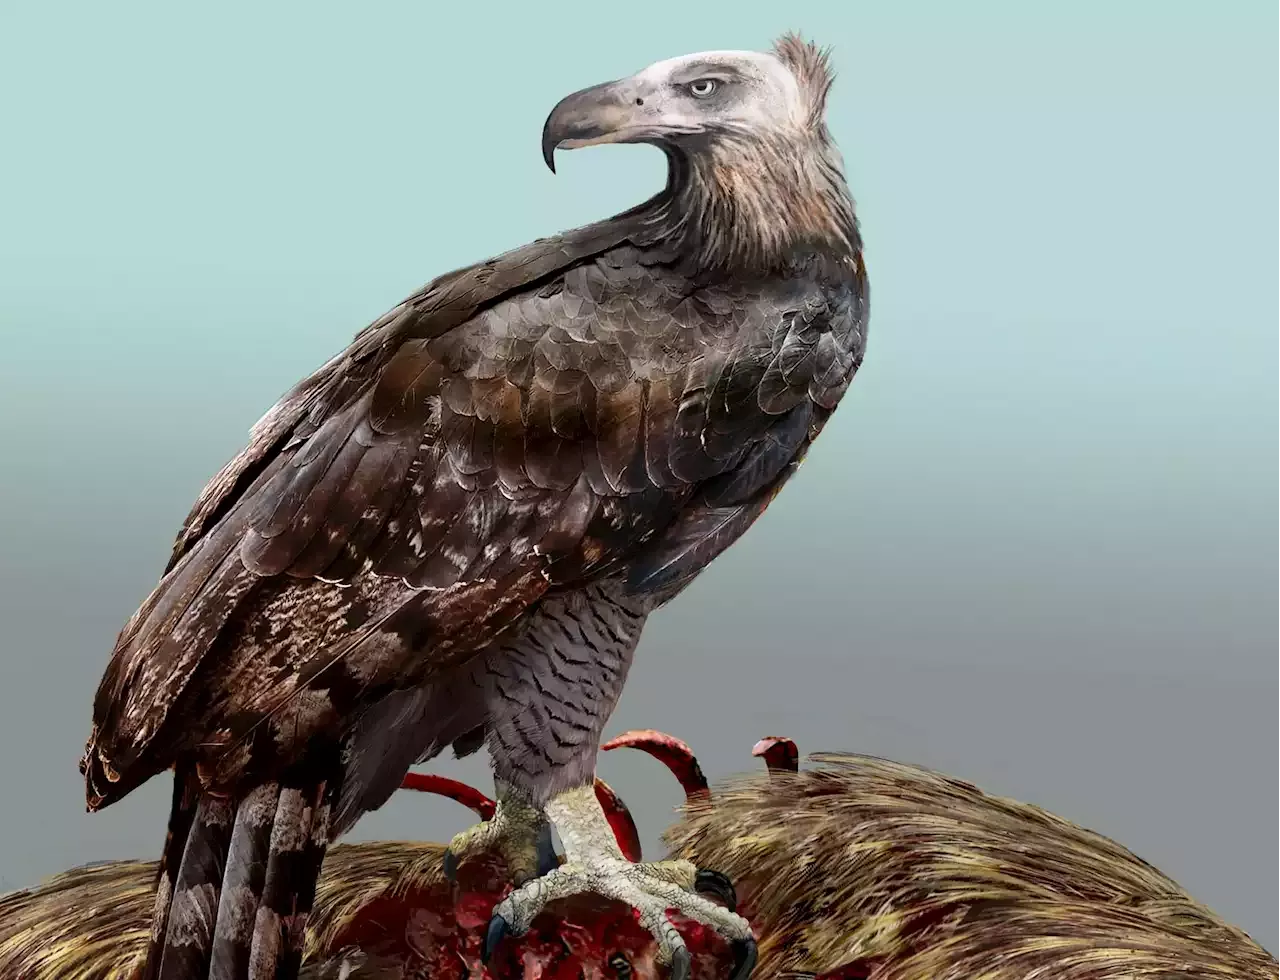 This 30-pound eagle would take down 400-pound prey and dig through their organs